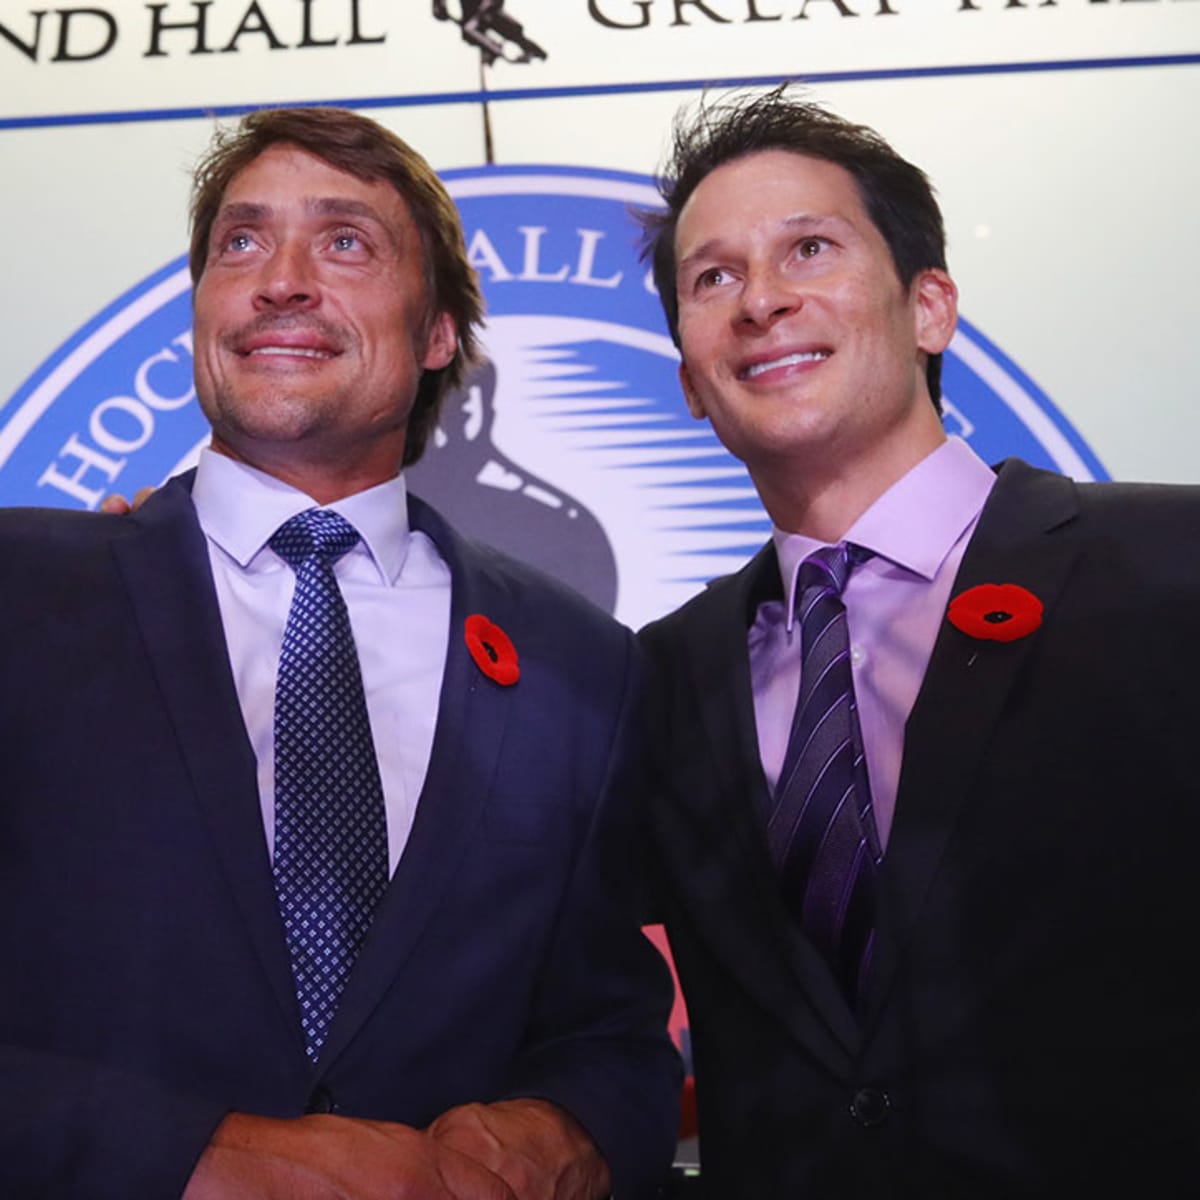 Kariya and Selanne: Friends for life head into Hall Of Fame